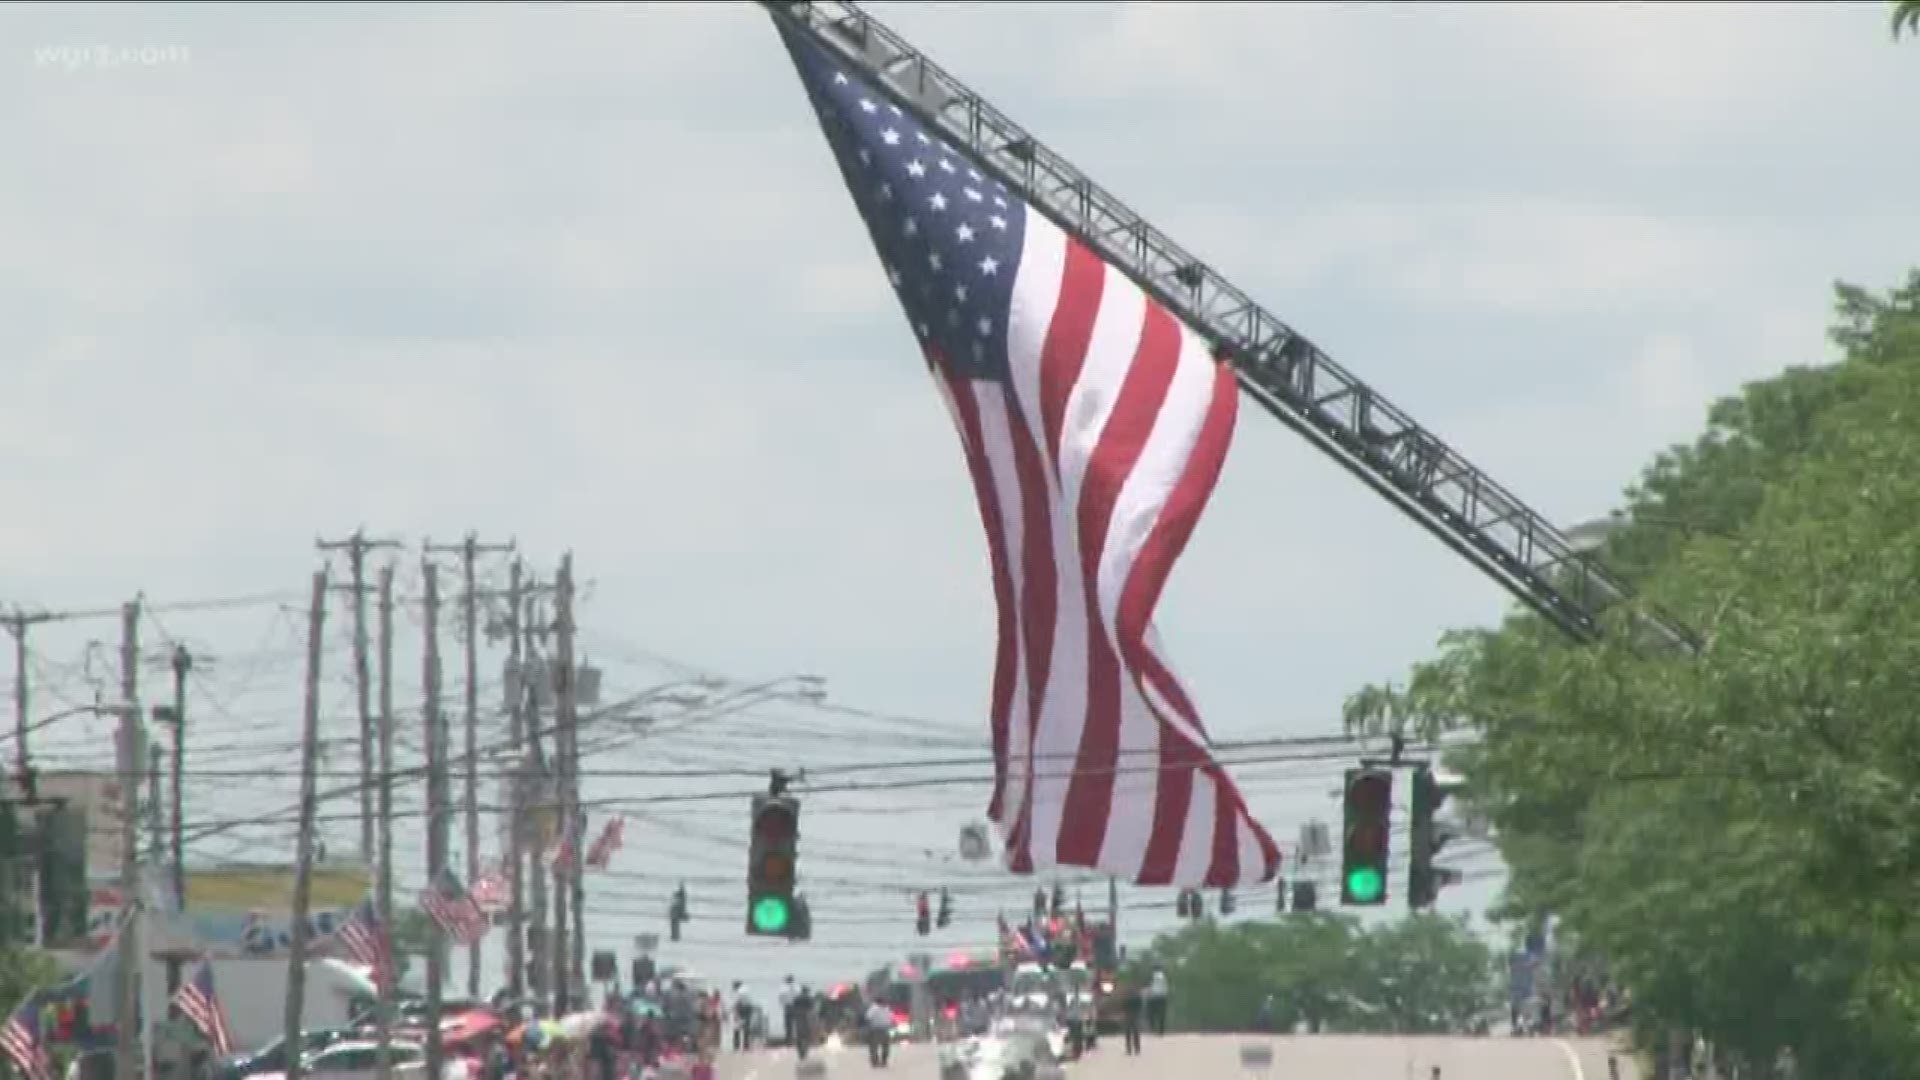 Western New York celebrates the 4th of July